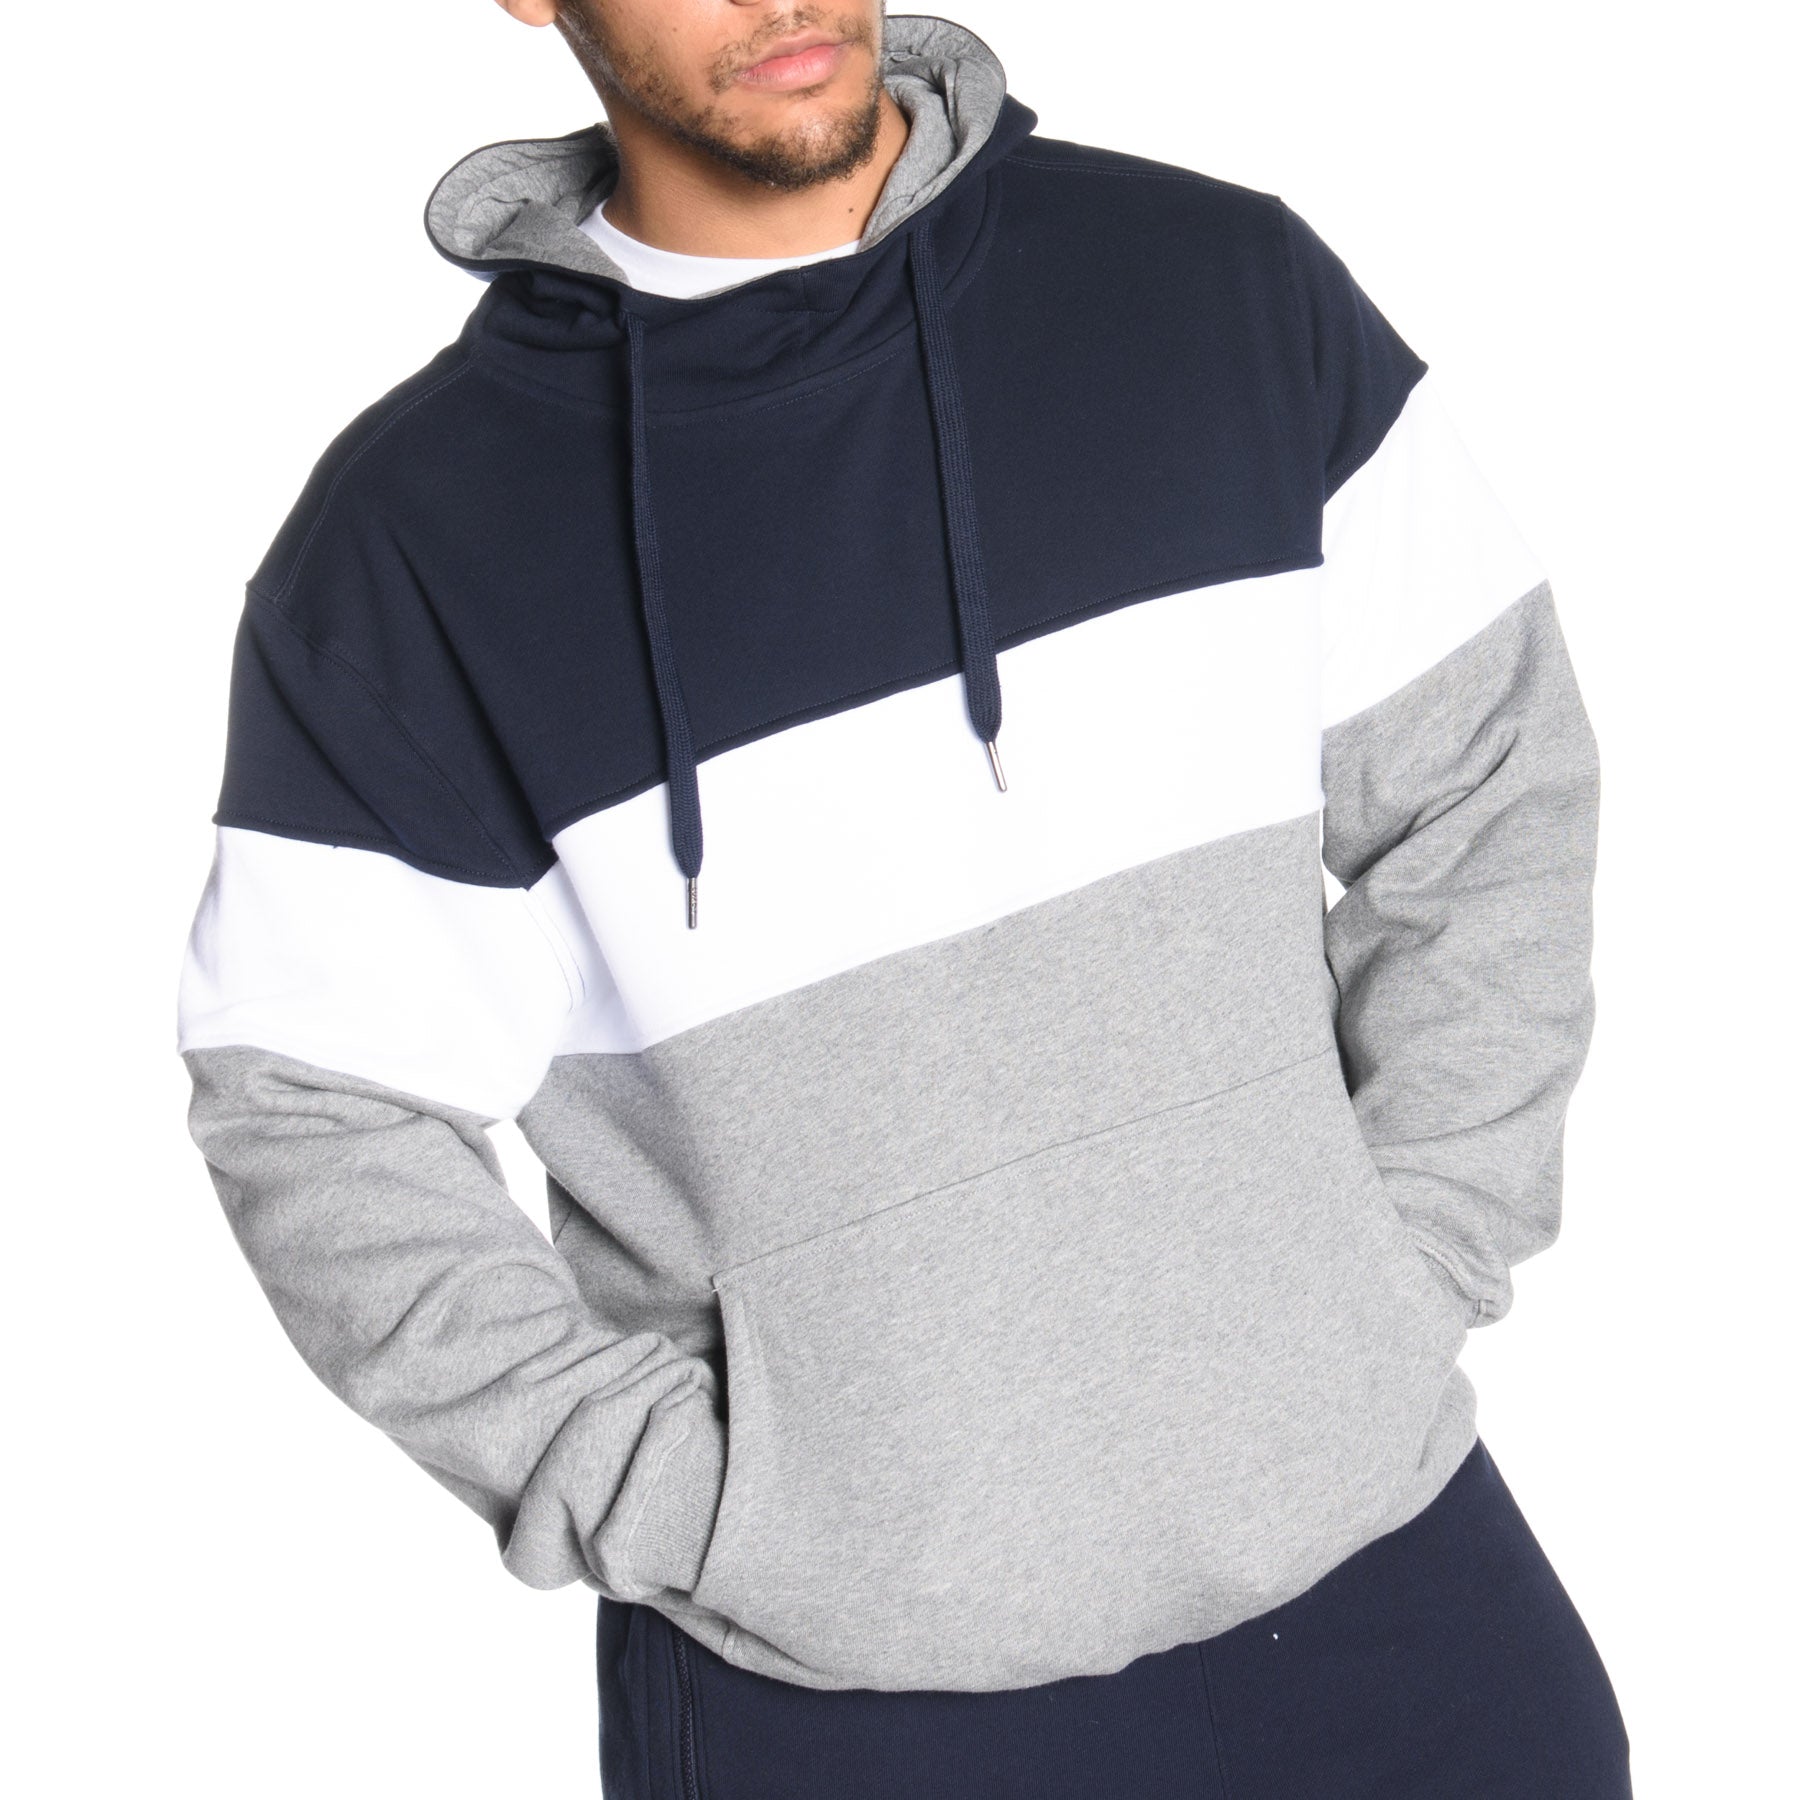 Louis Vuitton Reflective Hoodie Top Sellers, SAVE 46